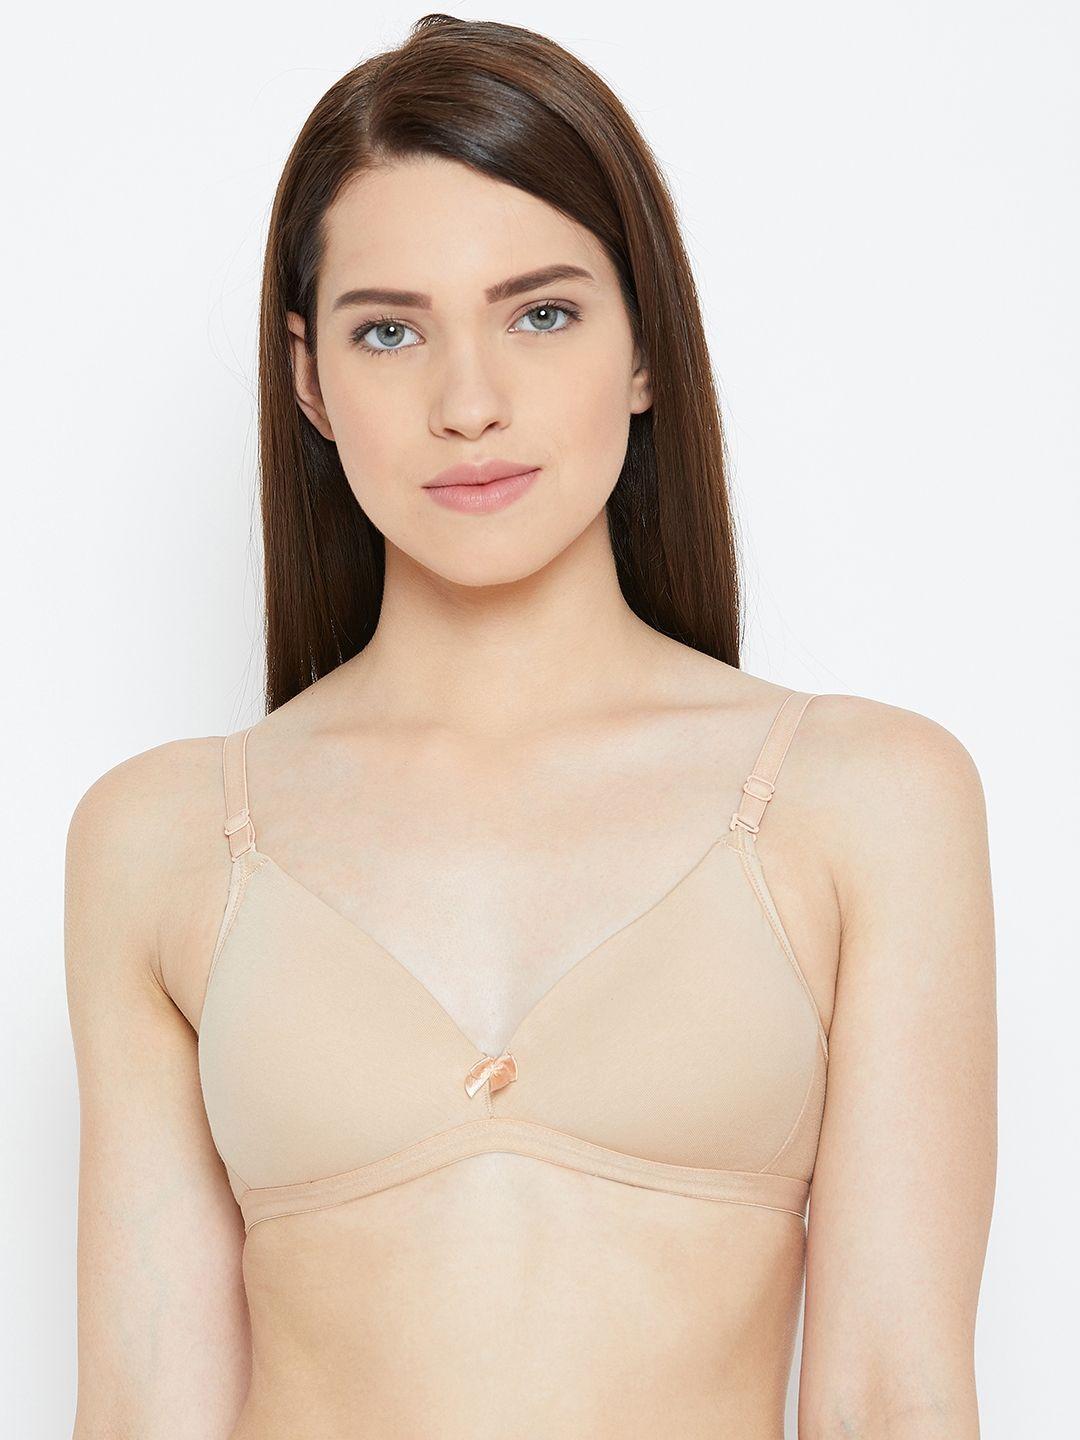 Lady Lyka Signature Beige Solid Non-Wired Lightly Padded T-shirt Bra